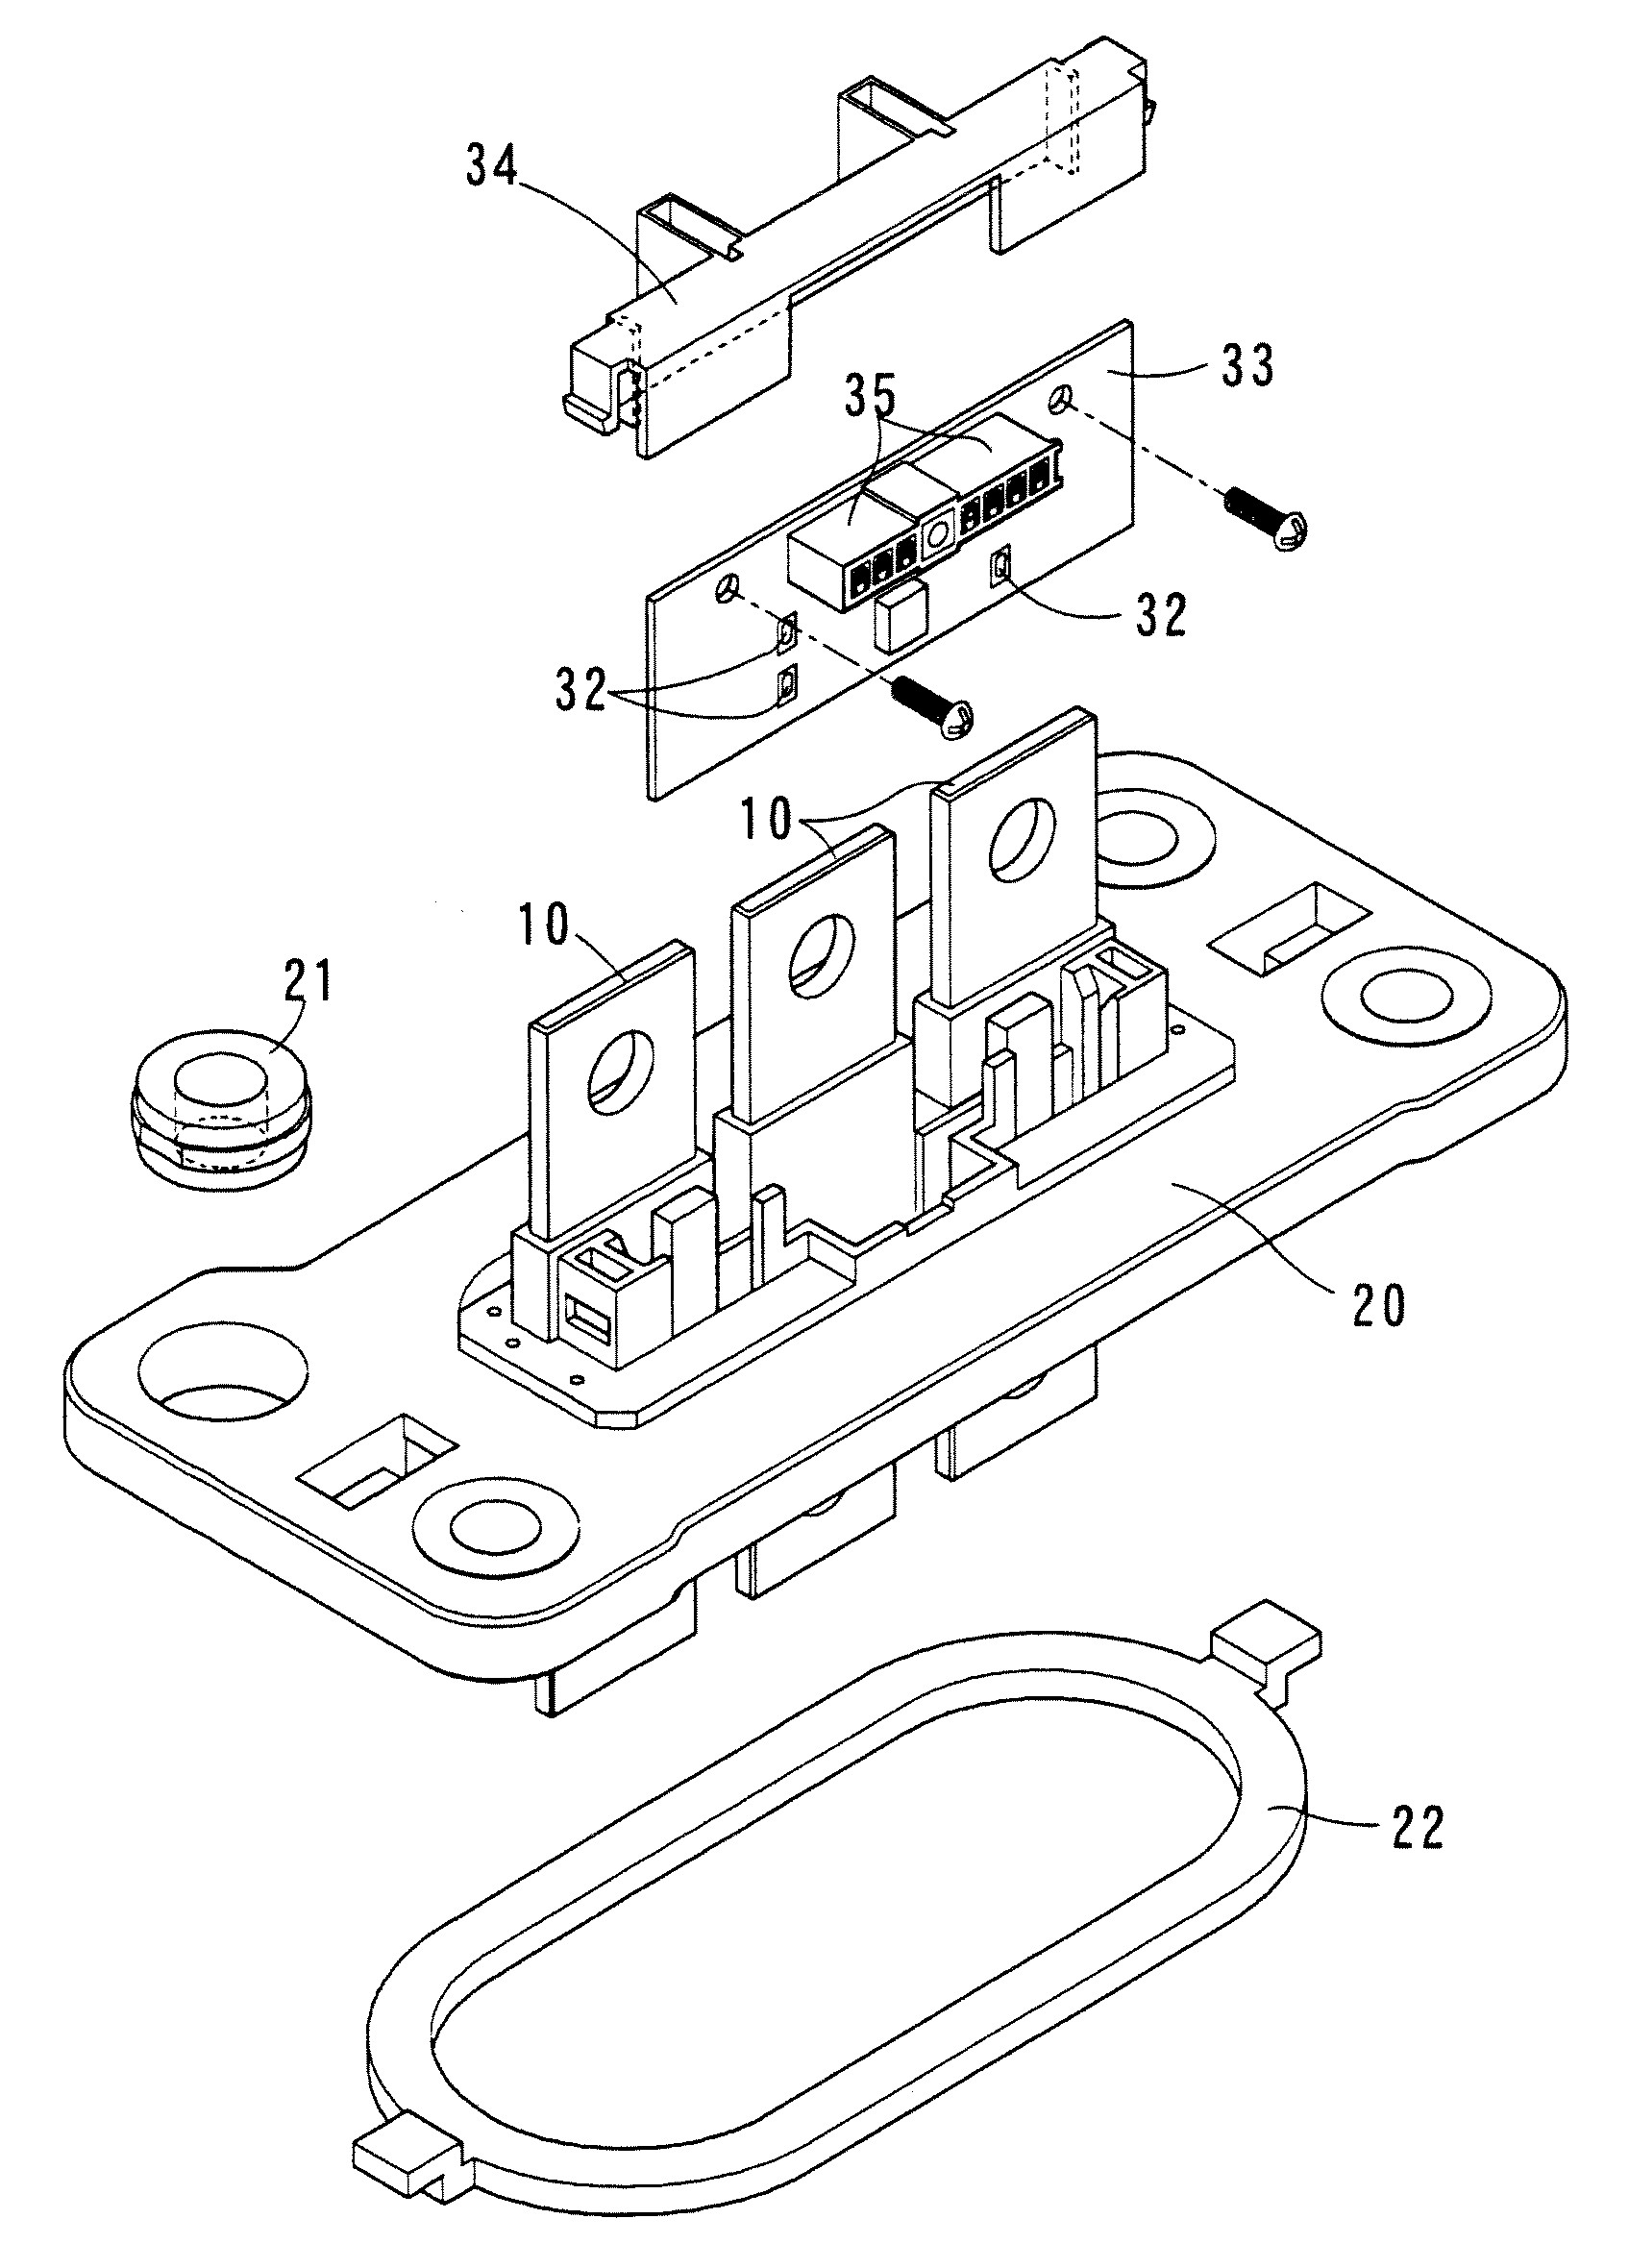 Relay busbar device with built-in current sensor for vehicle